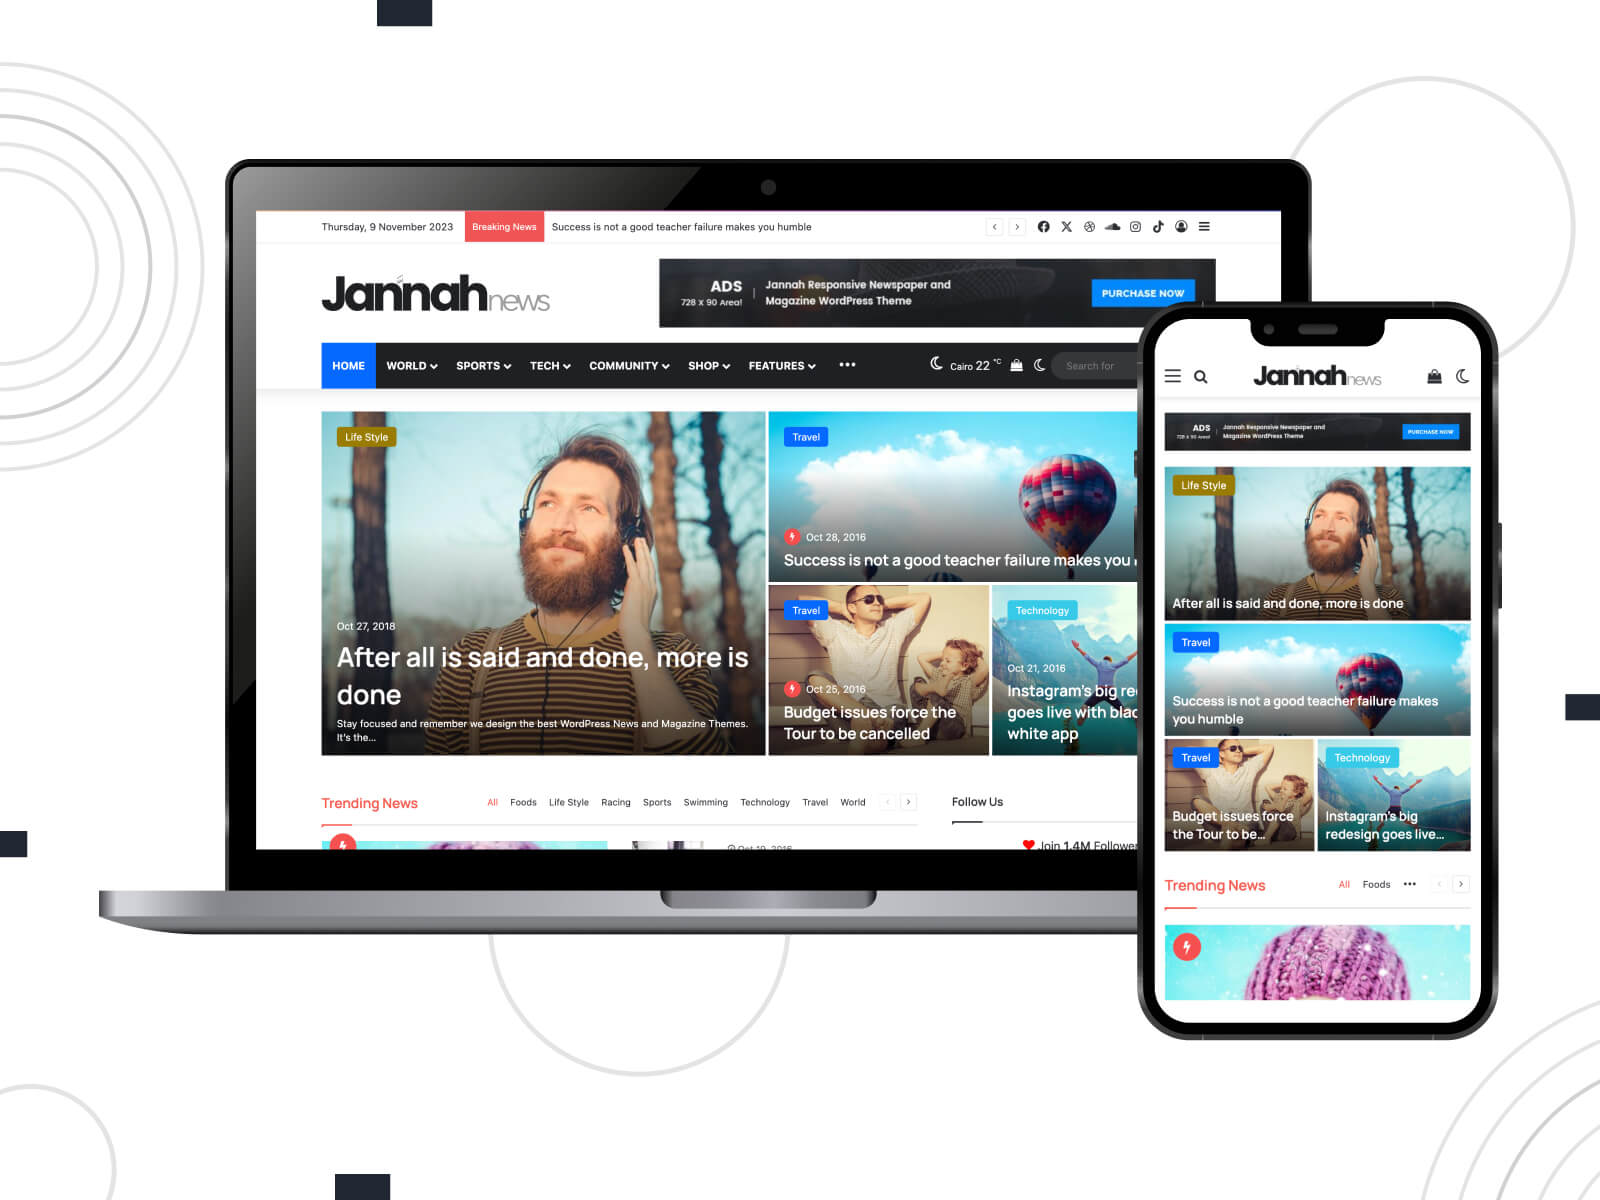 Photo of Jannah - light, rich, recognized as one of the finest WordPress themes for its elegant design and customizable options in steel blue, gray, and sky blue color mix.